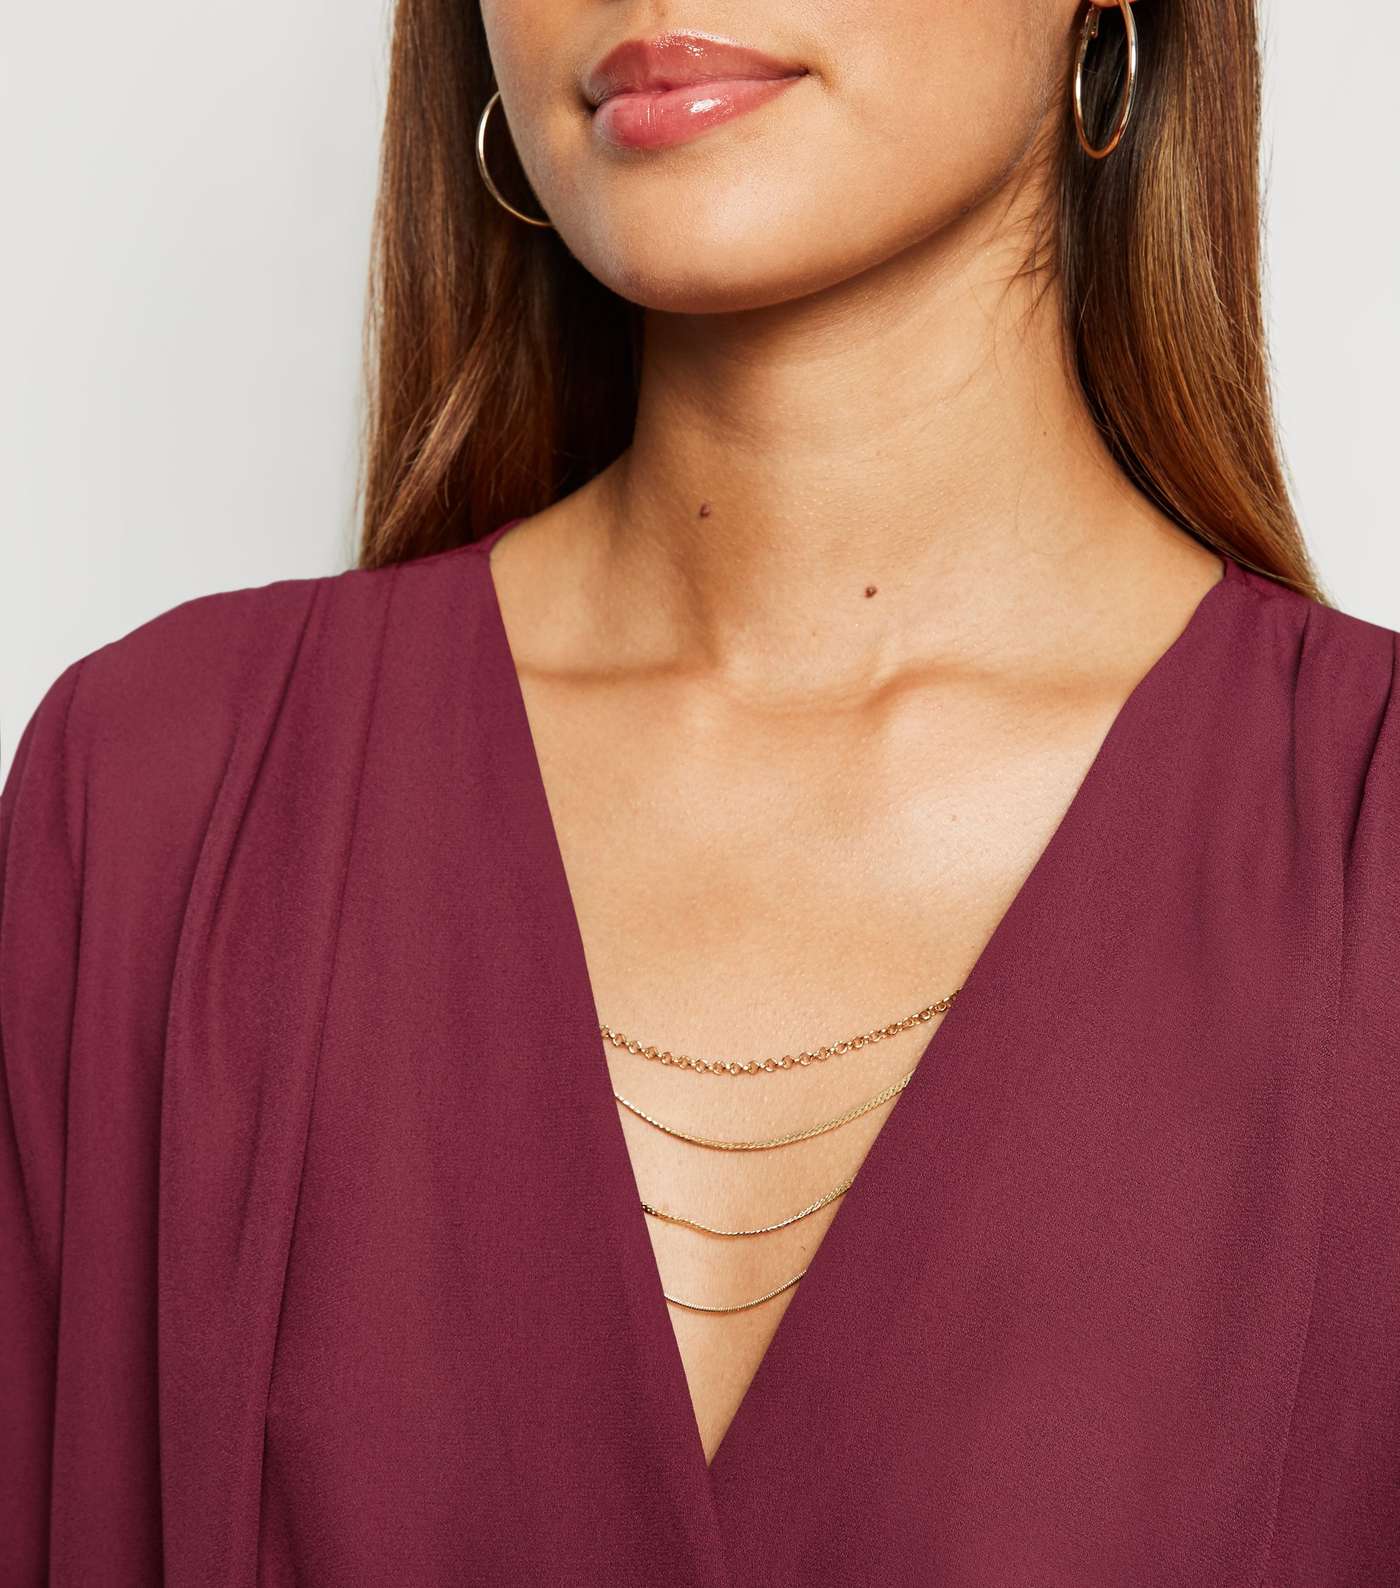 Burgundy Necklace Wrap Top Image 3